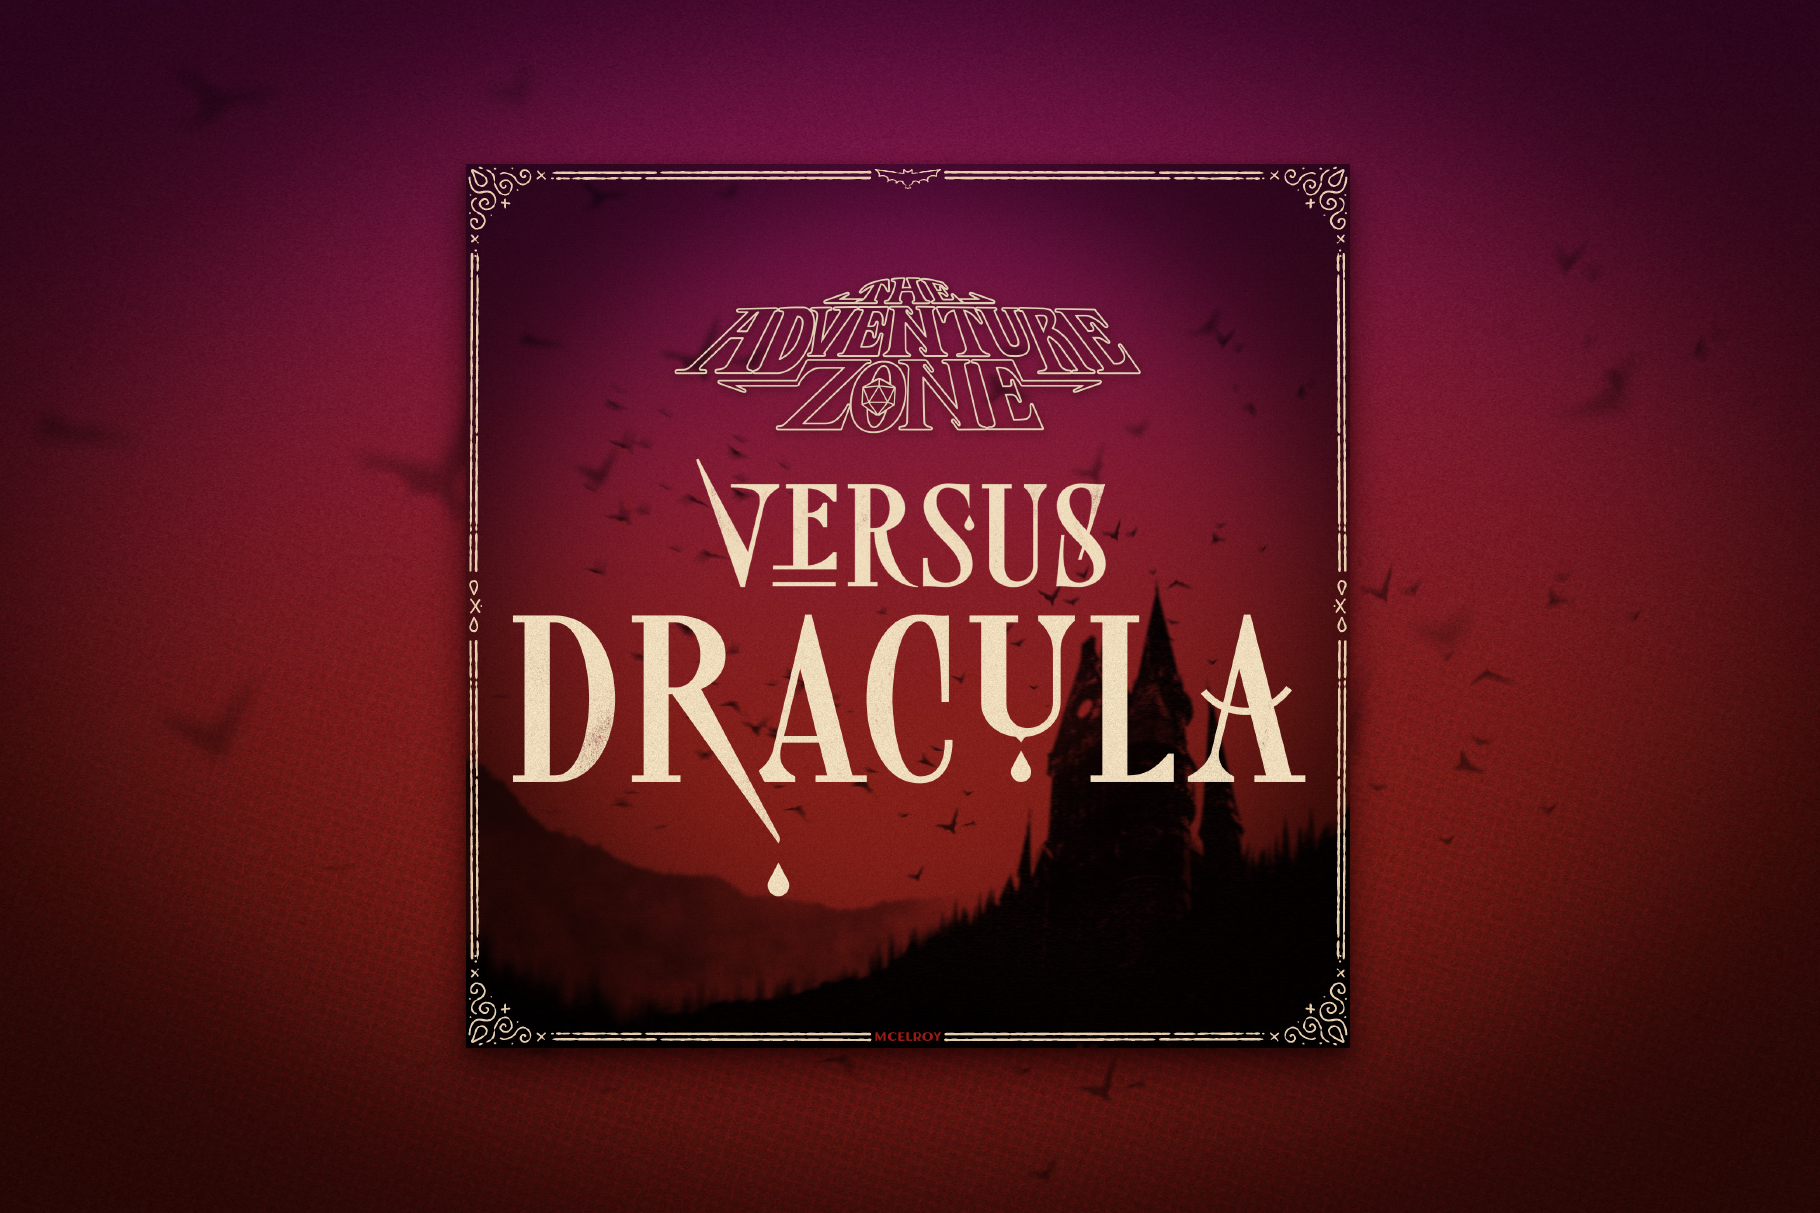 An illustration of a red and pink gradient sky. In the foreground is a shadowed castle on a hill with a swarm of bats flying from the castle to the opposite corner. In the center of the image in off white it says, “Versus Dracula” inside an ornate border. There are drops of blood dripping off some of the letters. The top center of the border is a line-art bat. The bottom center of the border says “MCELROY” in dark red.